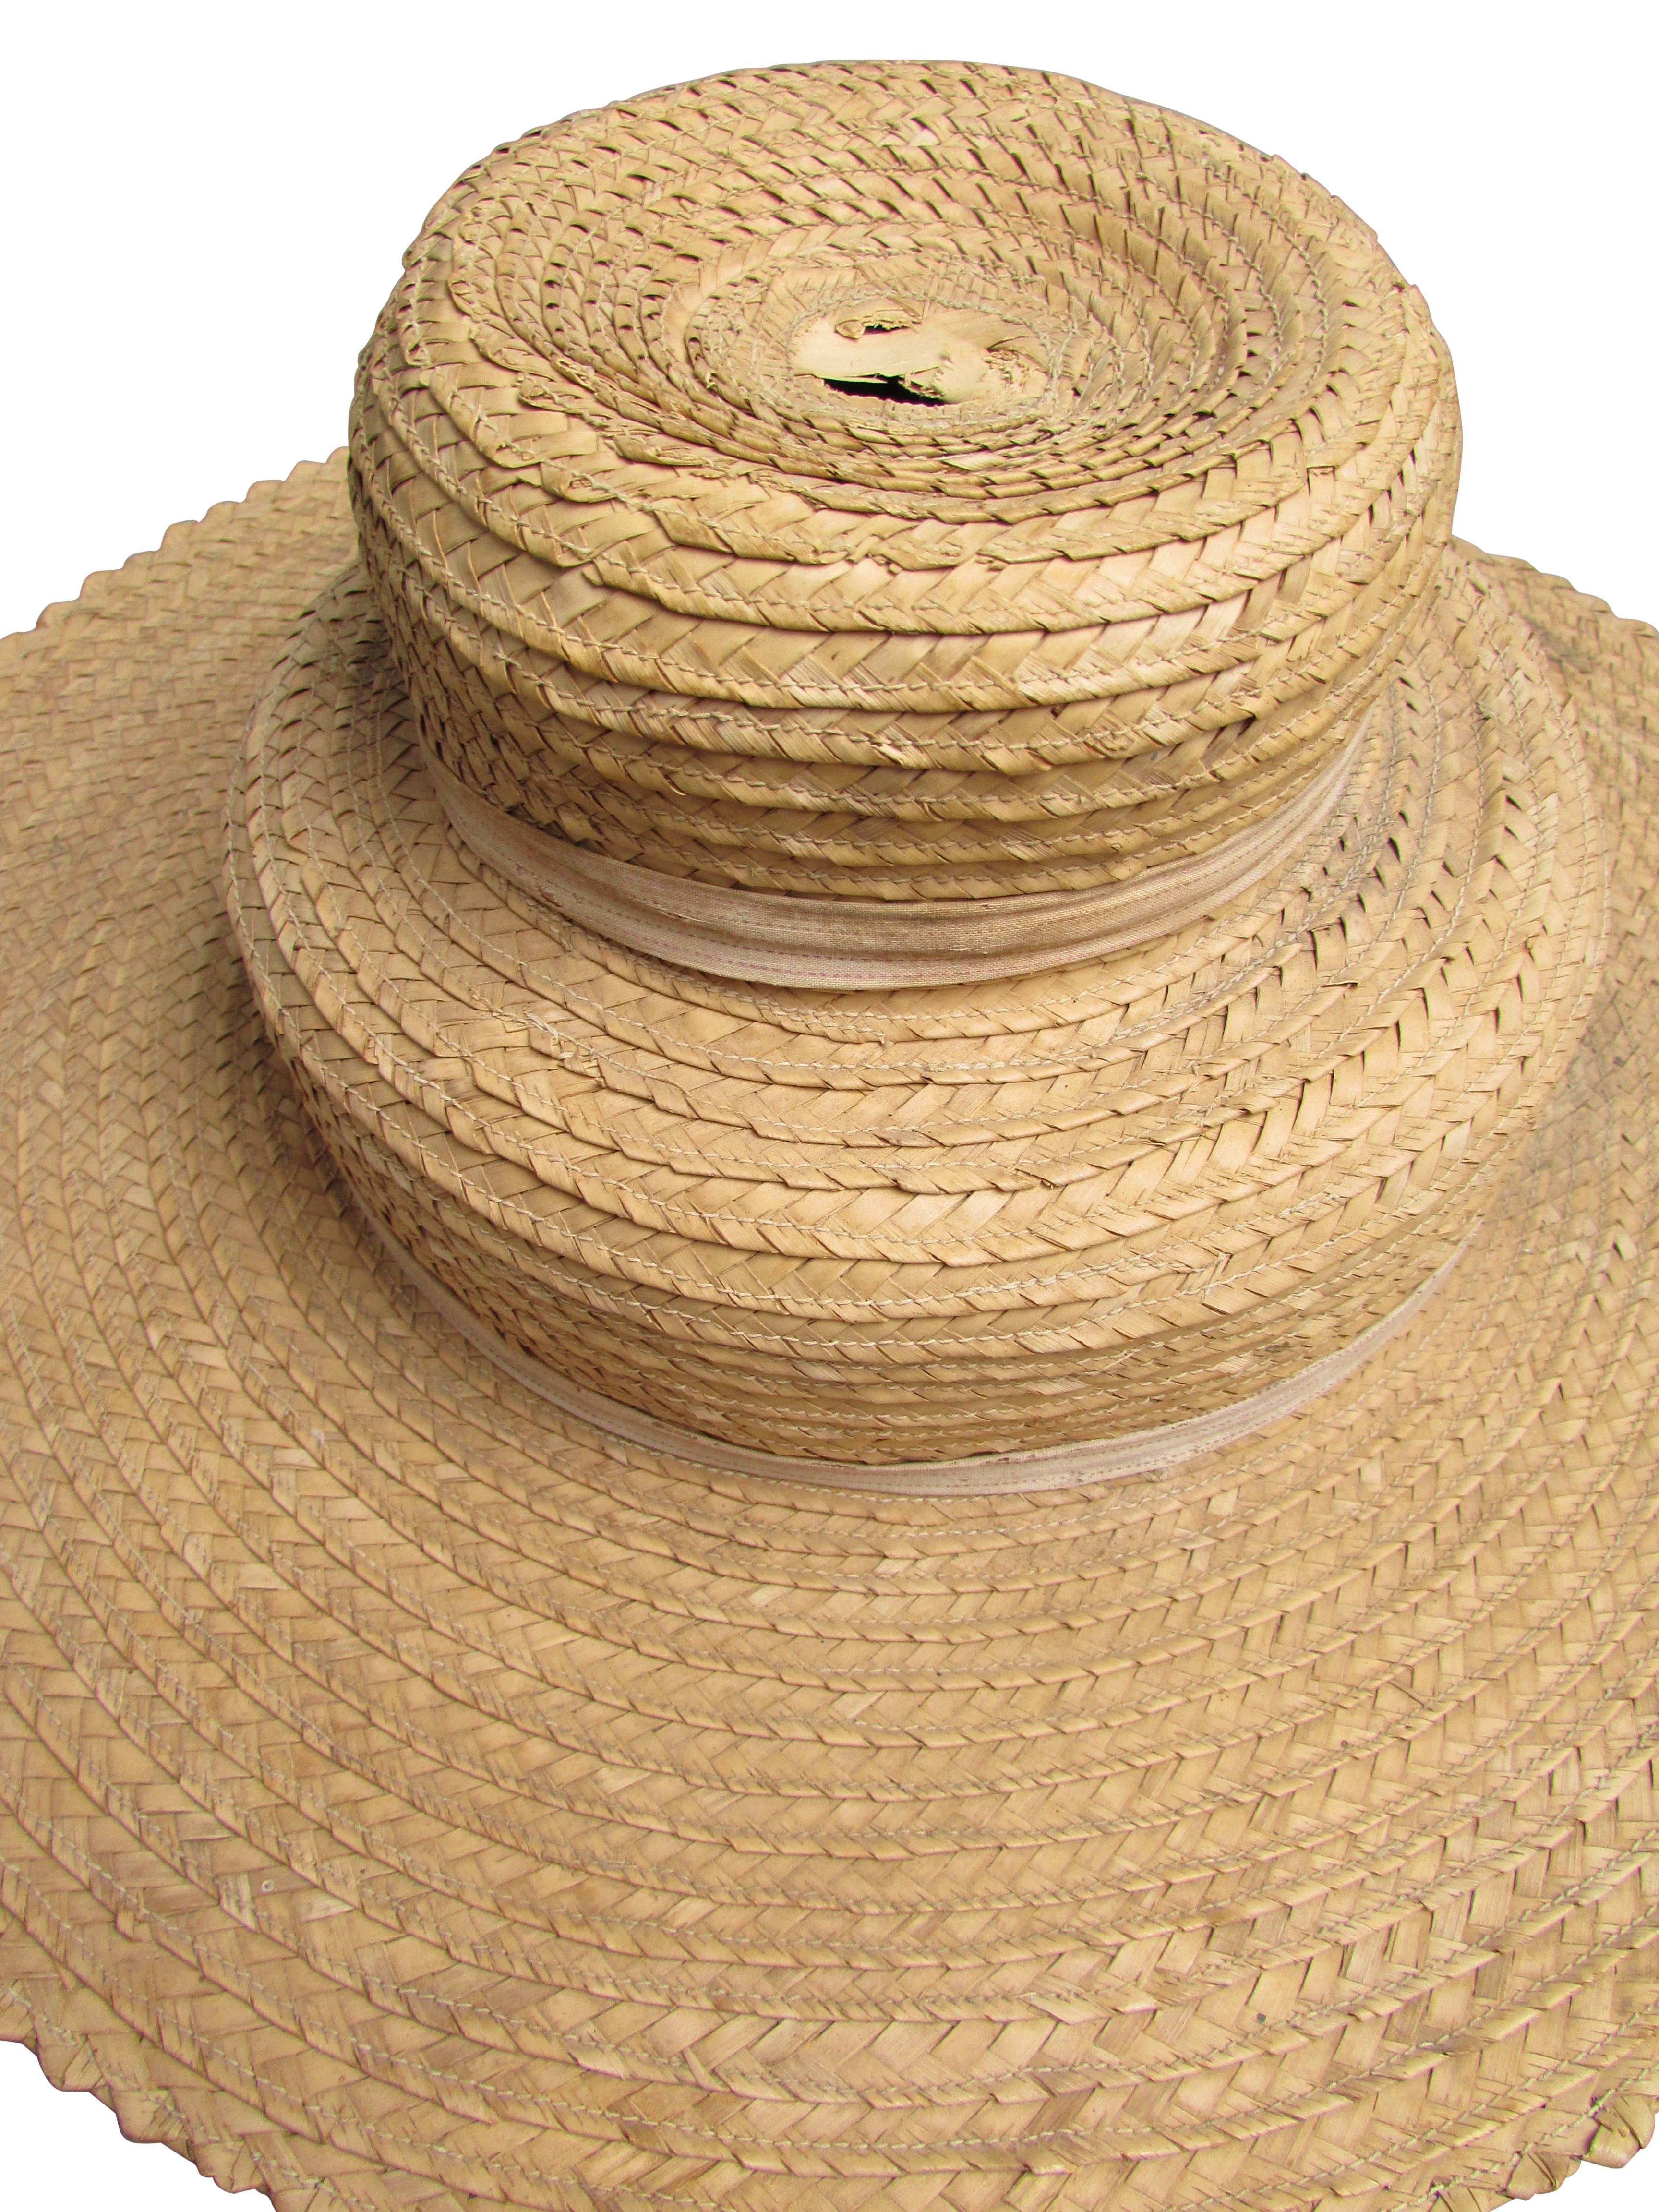 American Early Two-Tiered Shaker Hat